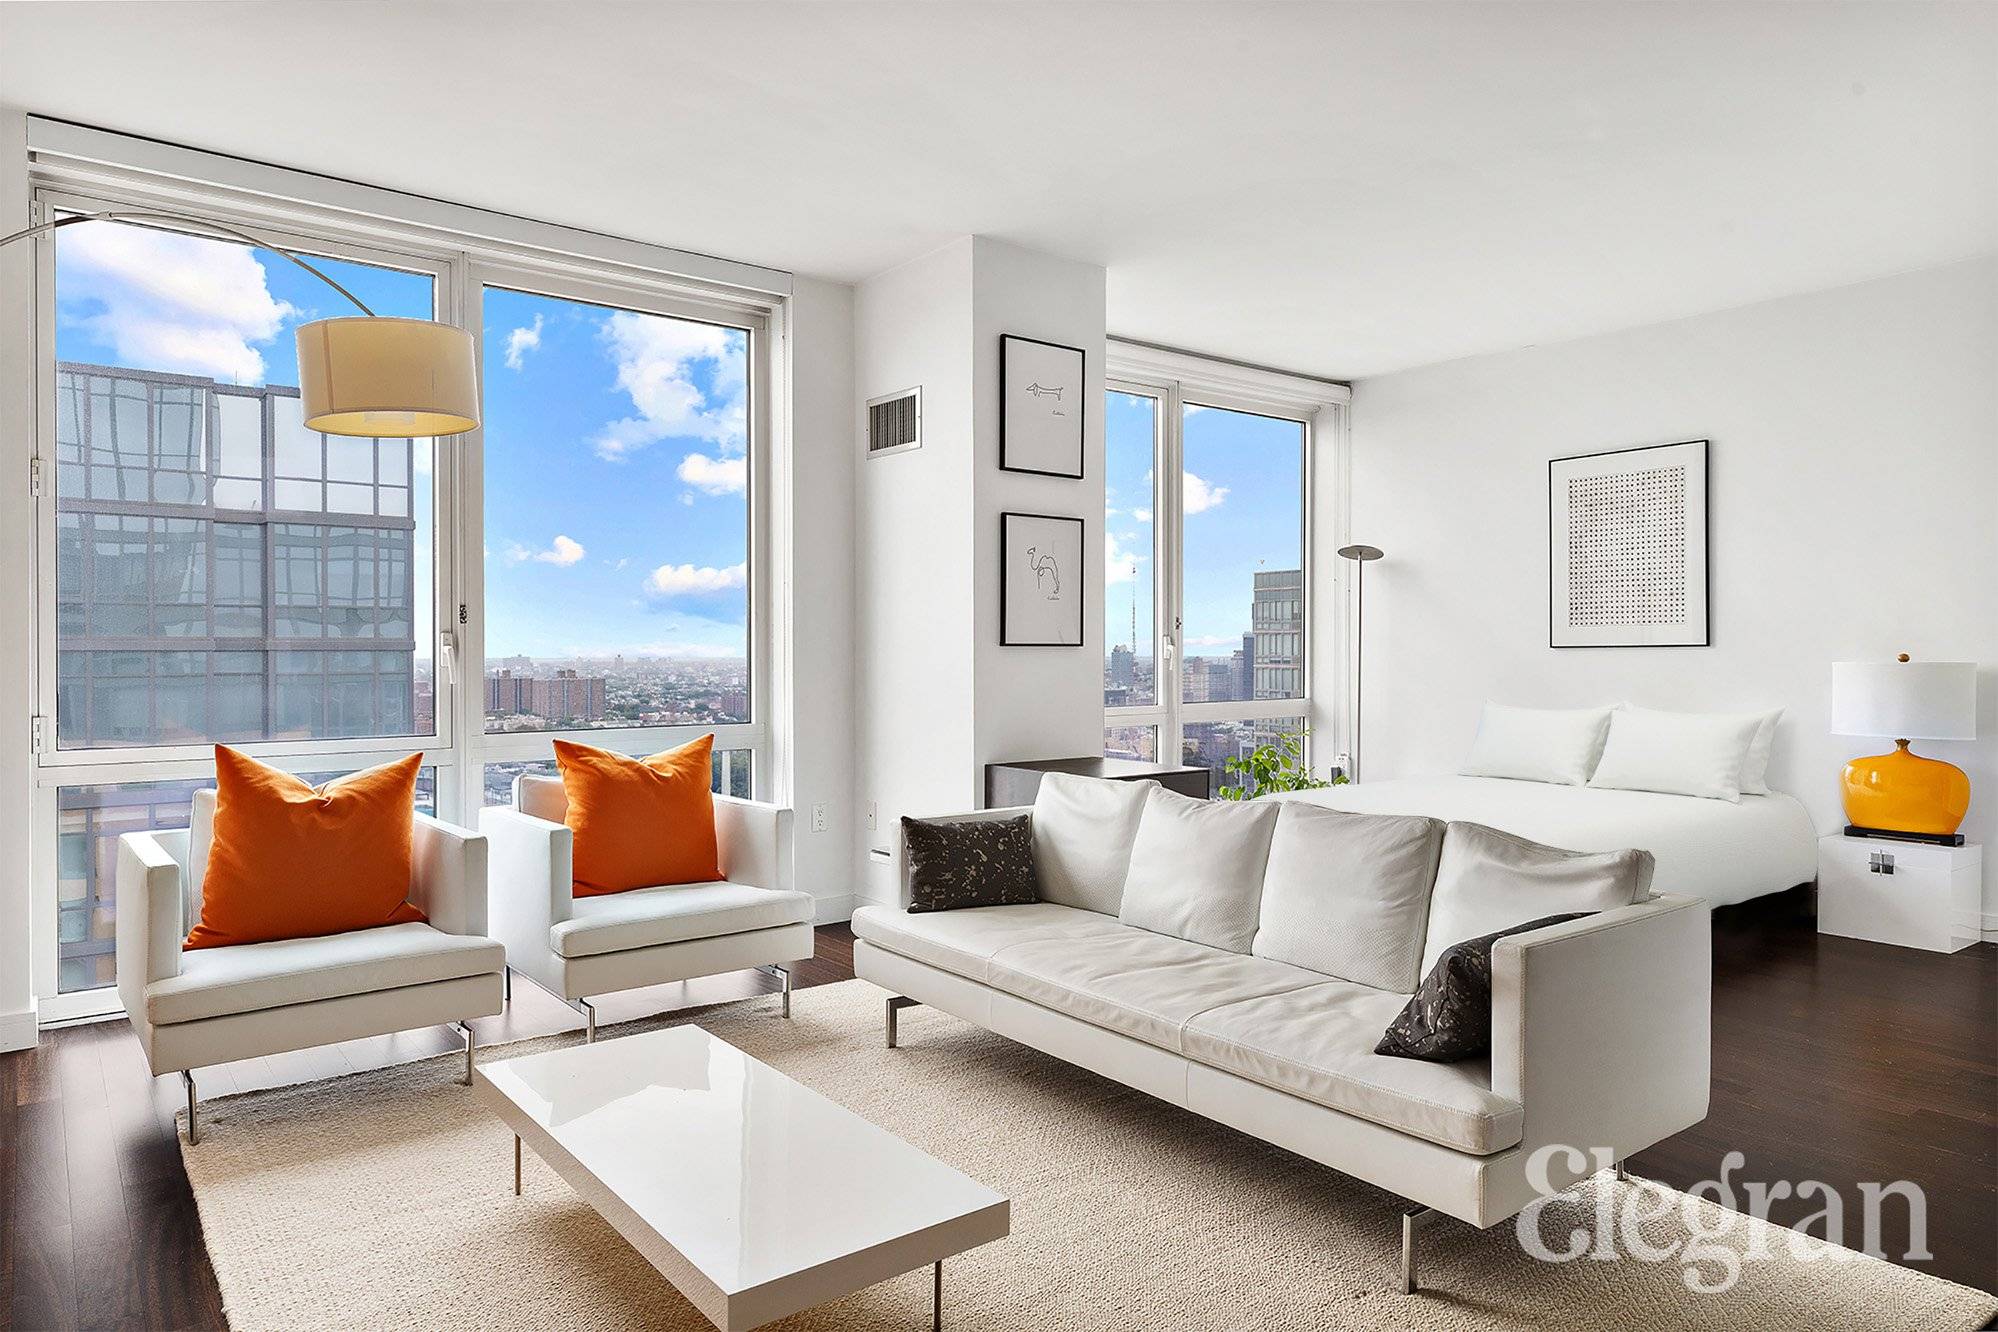 Sunlight, views and open space shine in this high floor, convertible one bedroom apartment.